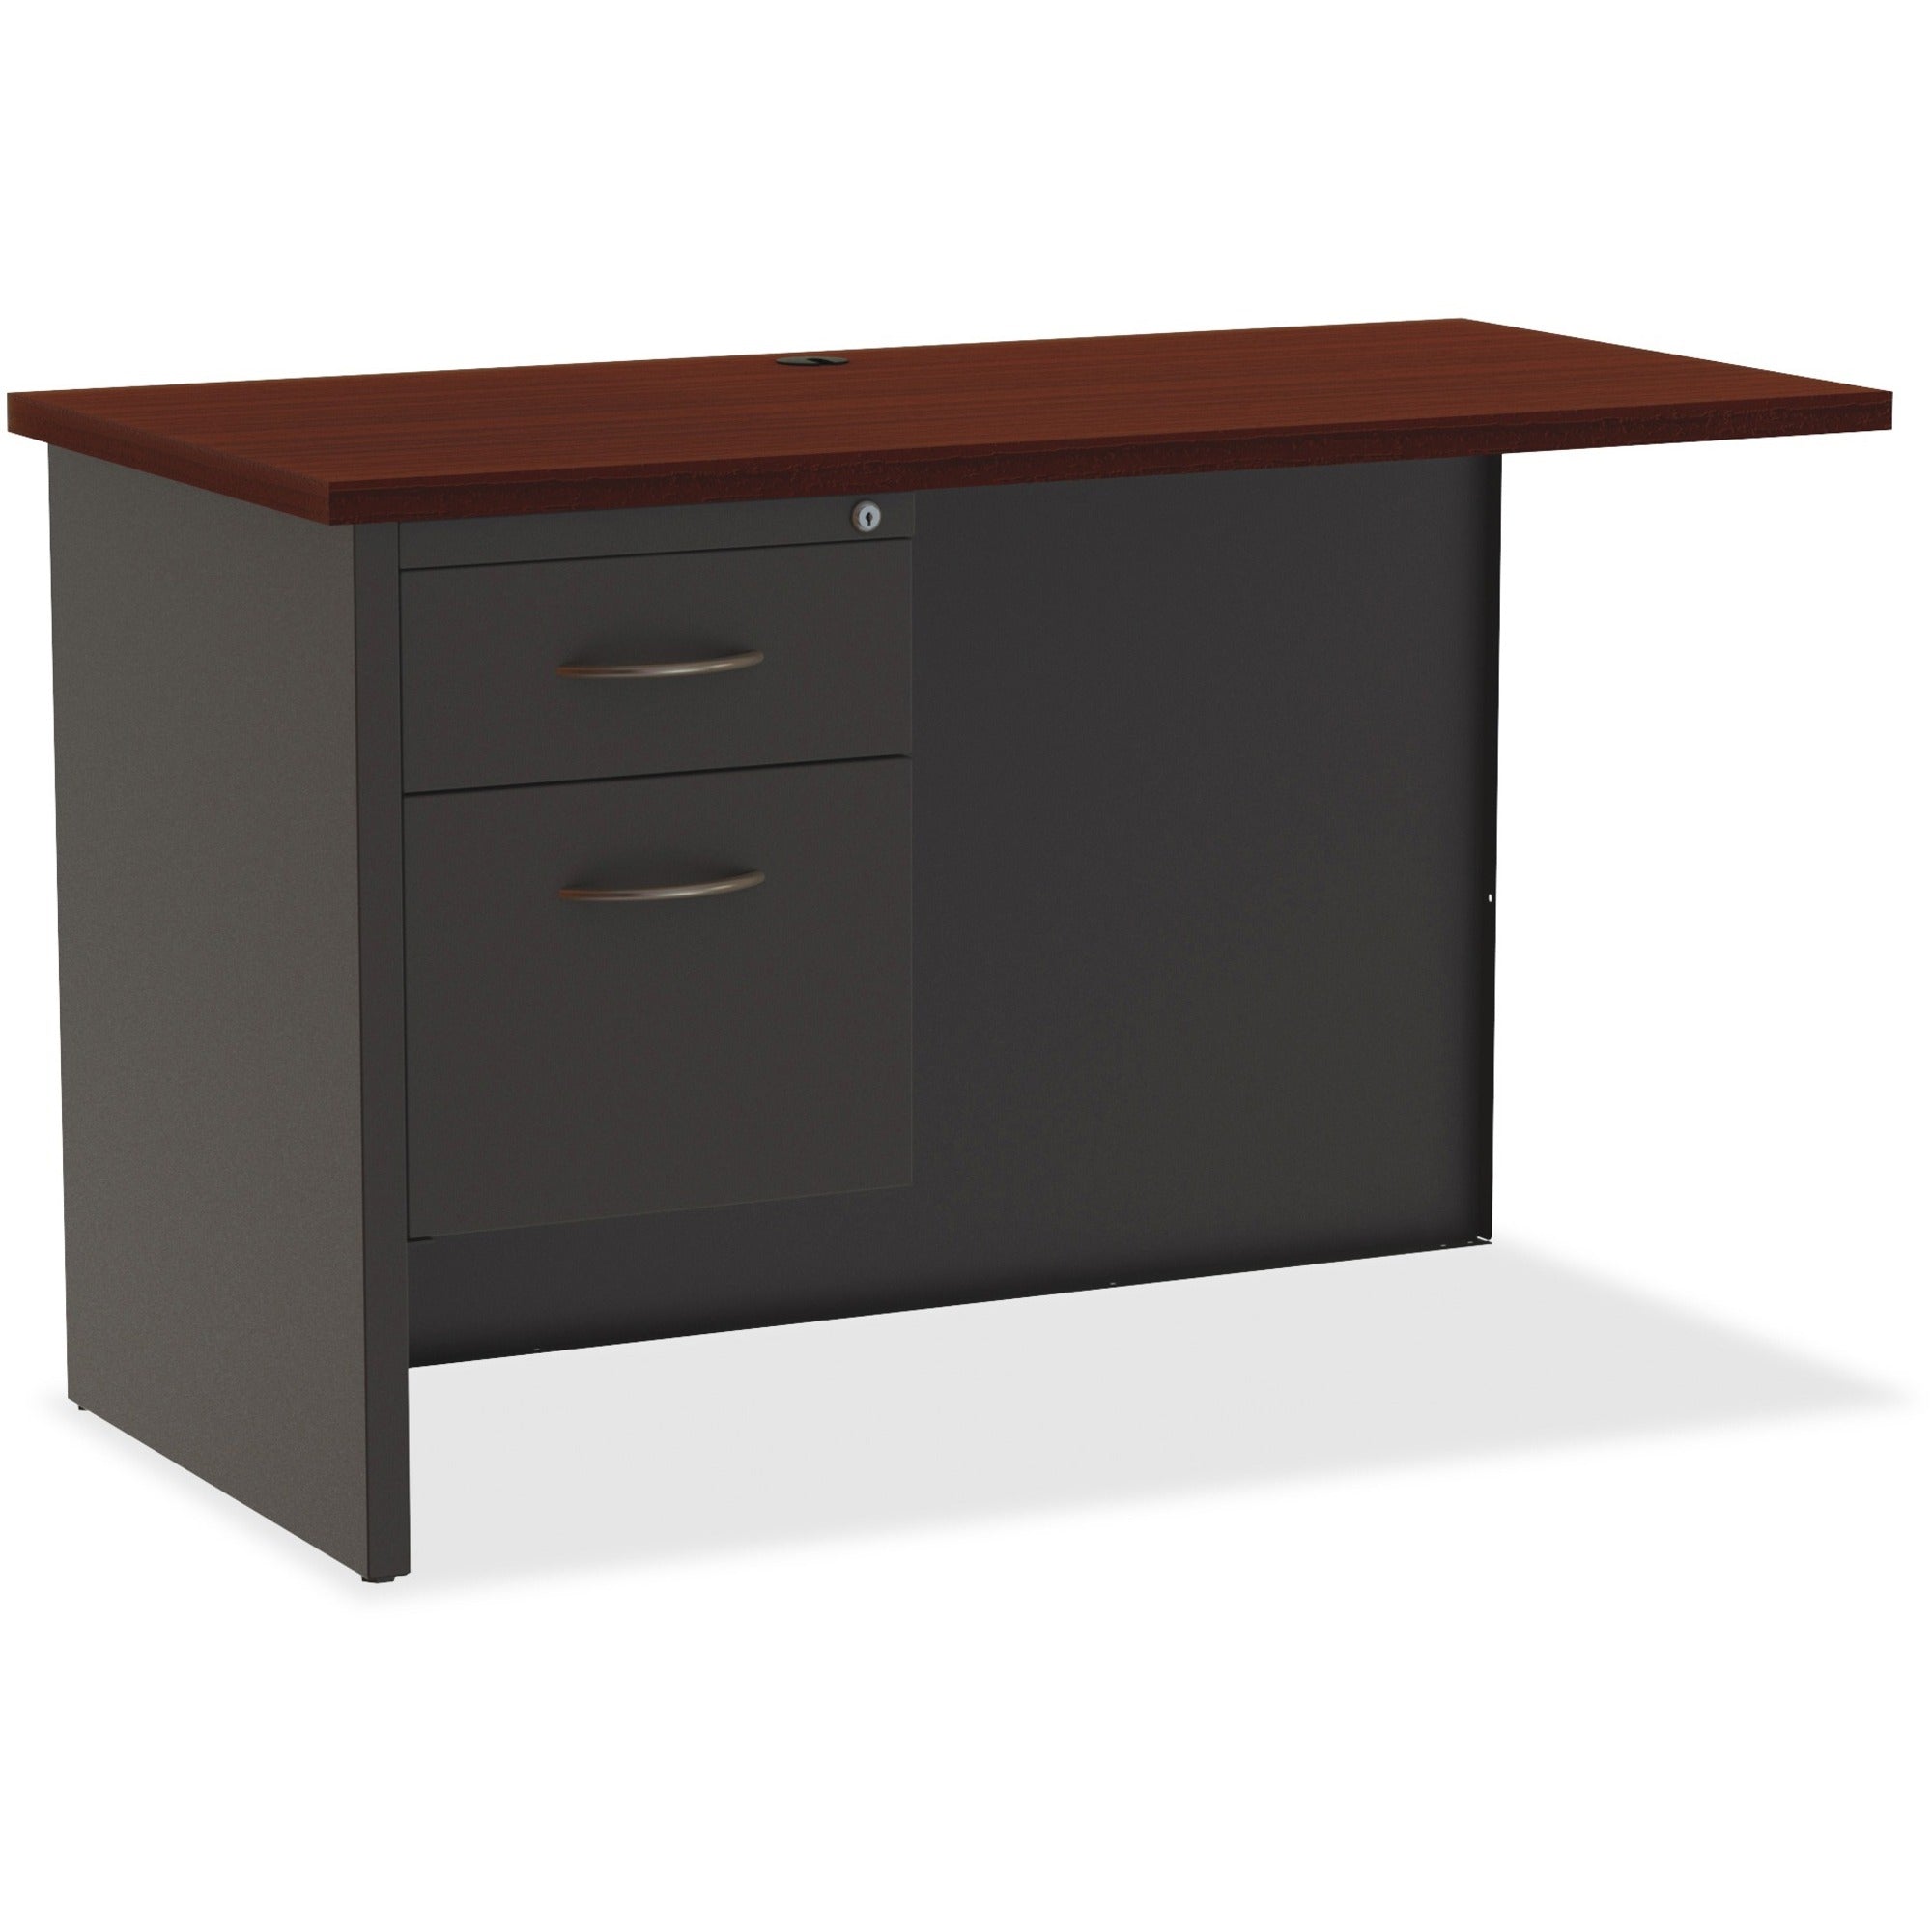 Lorell Fortress Modular Series Left Return - 48" x 24" , 1.1" Top - 2 x Box, File Drawer(s) - Single Pedestal on Left Side - Material: Steel - Finish: Mahogany Laminate, Charcoal - Scratch Resistant, Stain Resistant, Ball-bearing Suspension, Grommet, - 